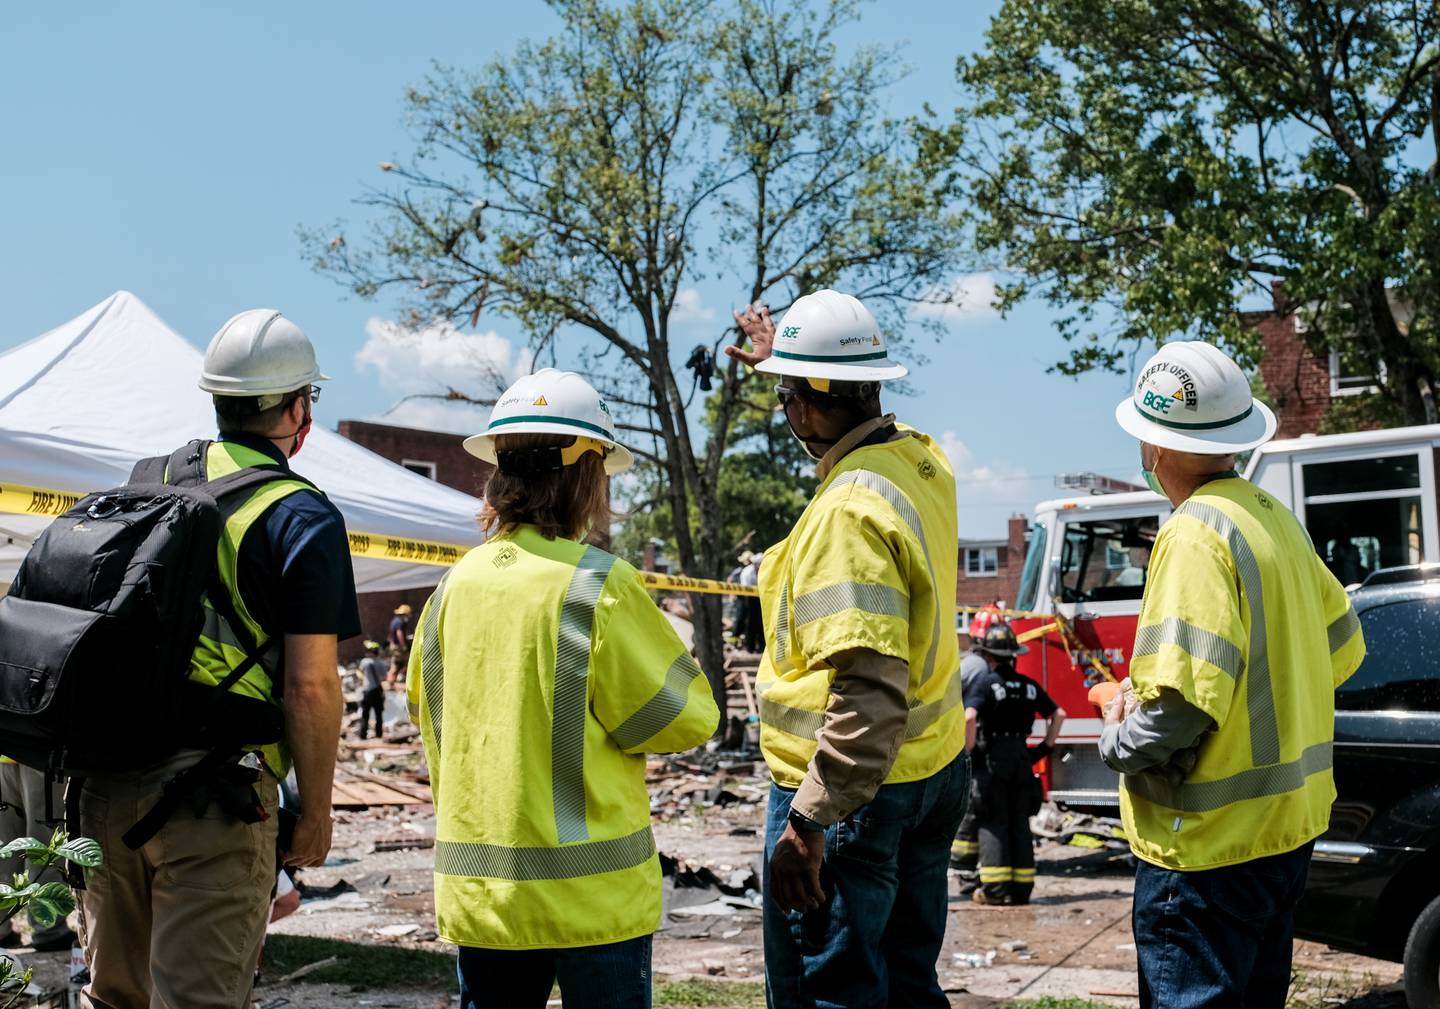 Baltimore Gas and Electric employees work at the scene of an explosion on August 10, 2020 in Baltimore.